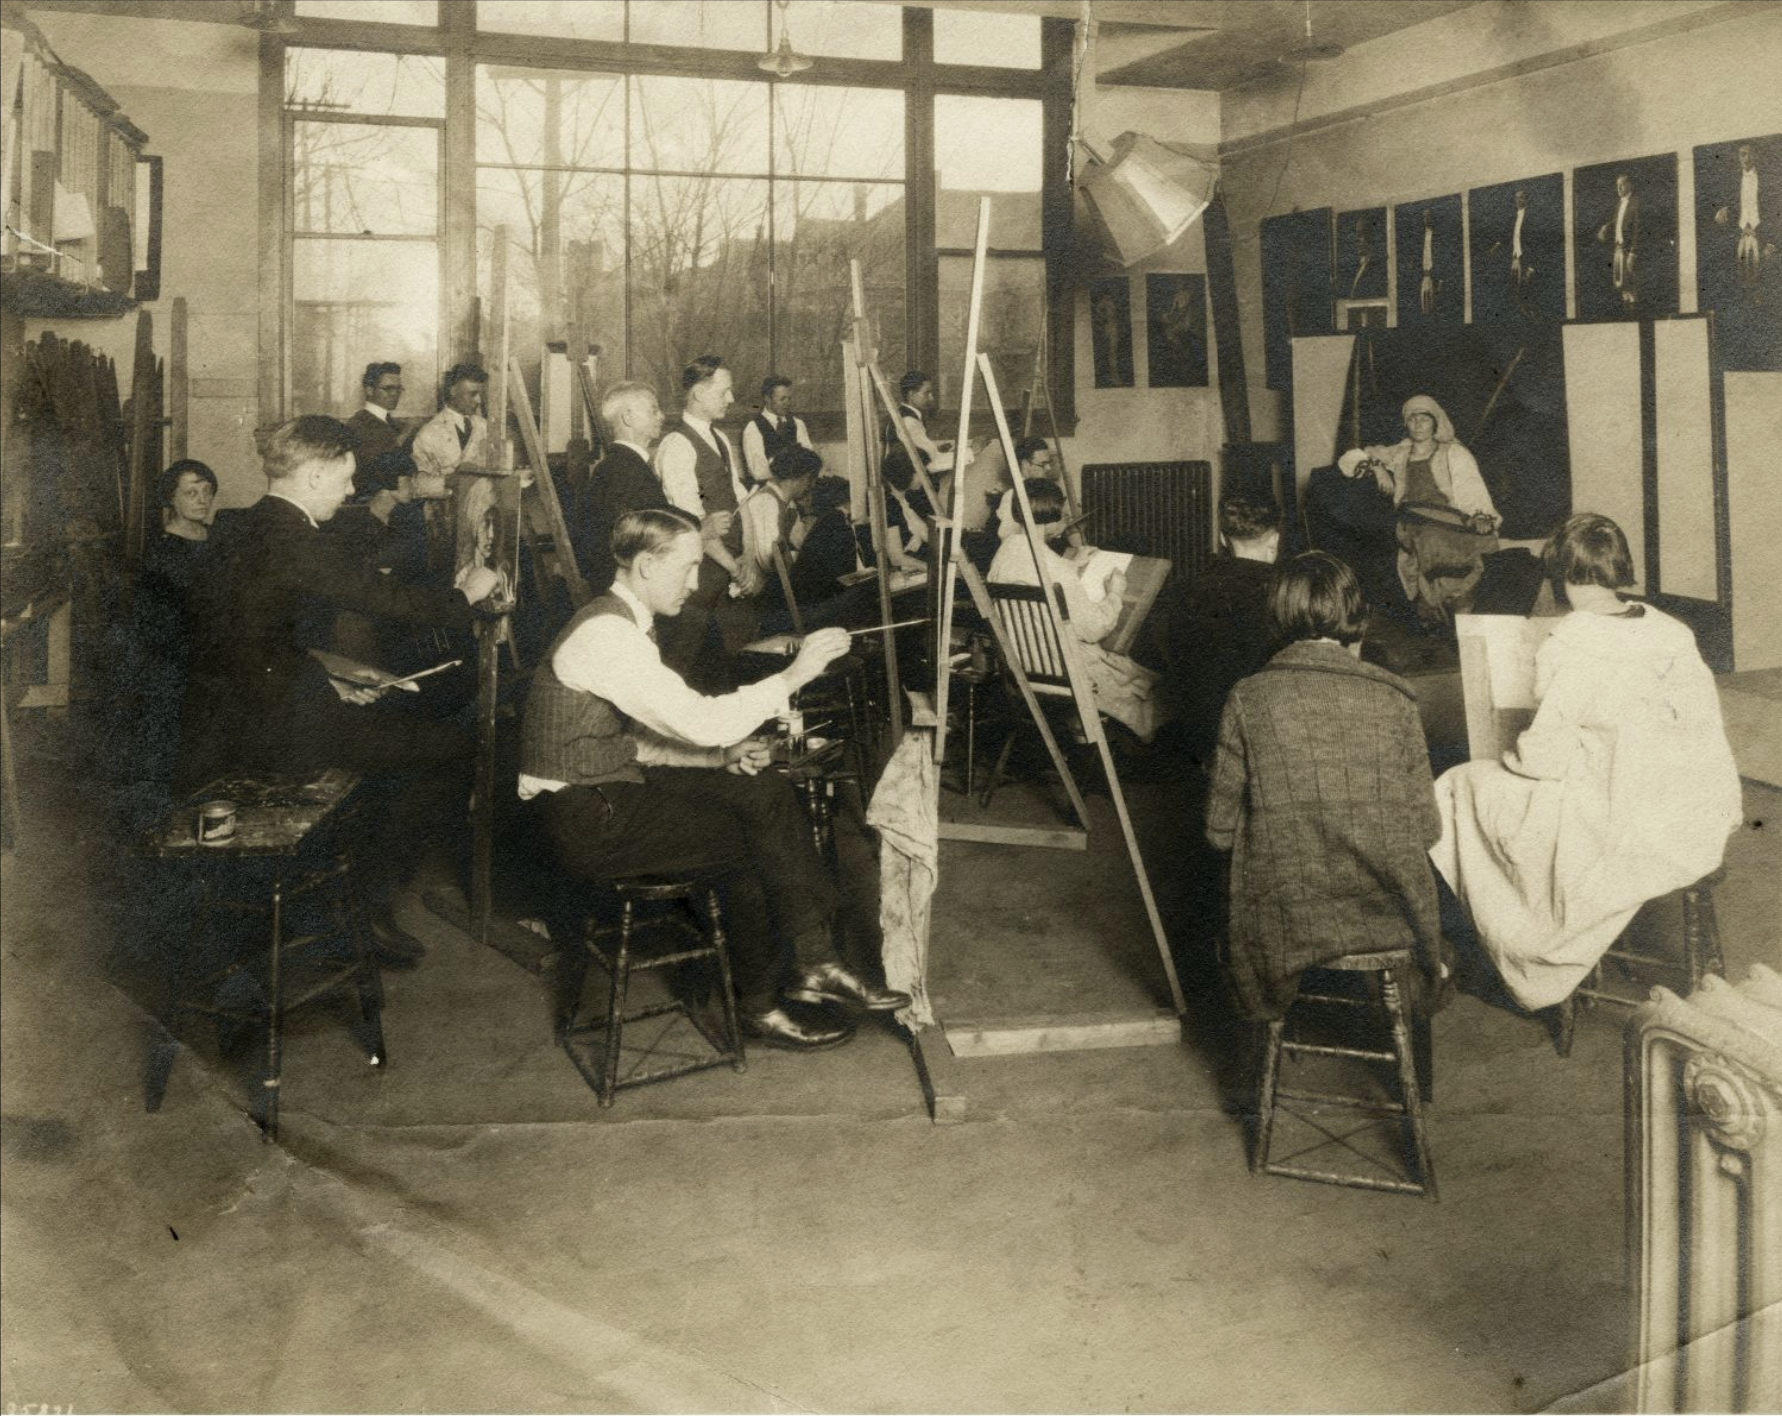 Several students sit at easels and paint in a large classroom. Their model poses at the front of the classroom.